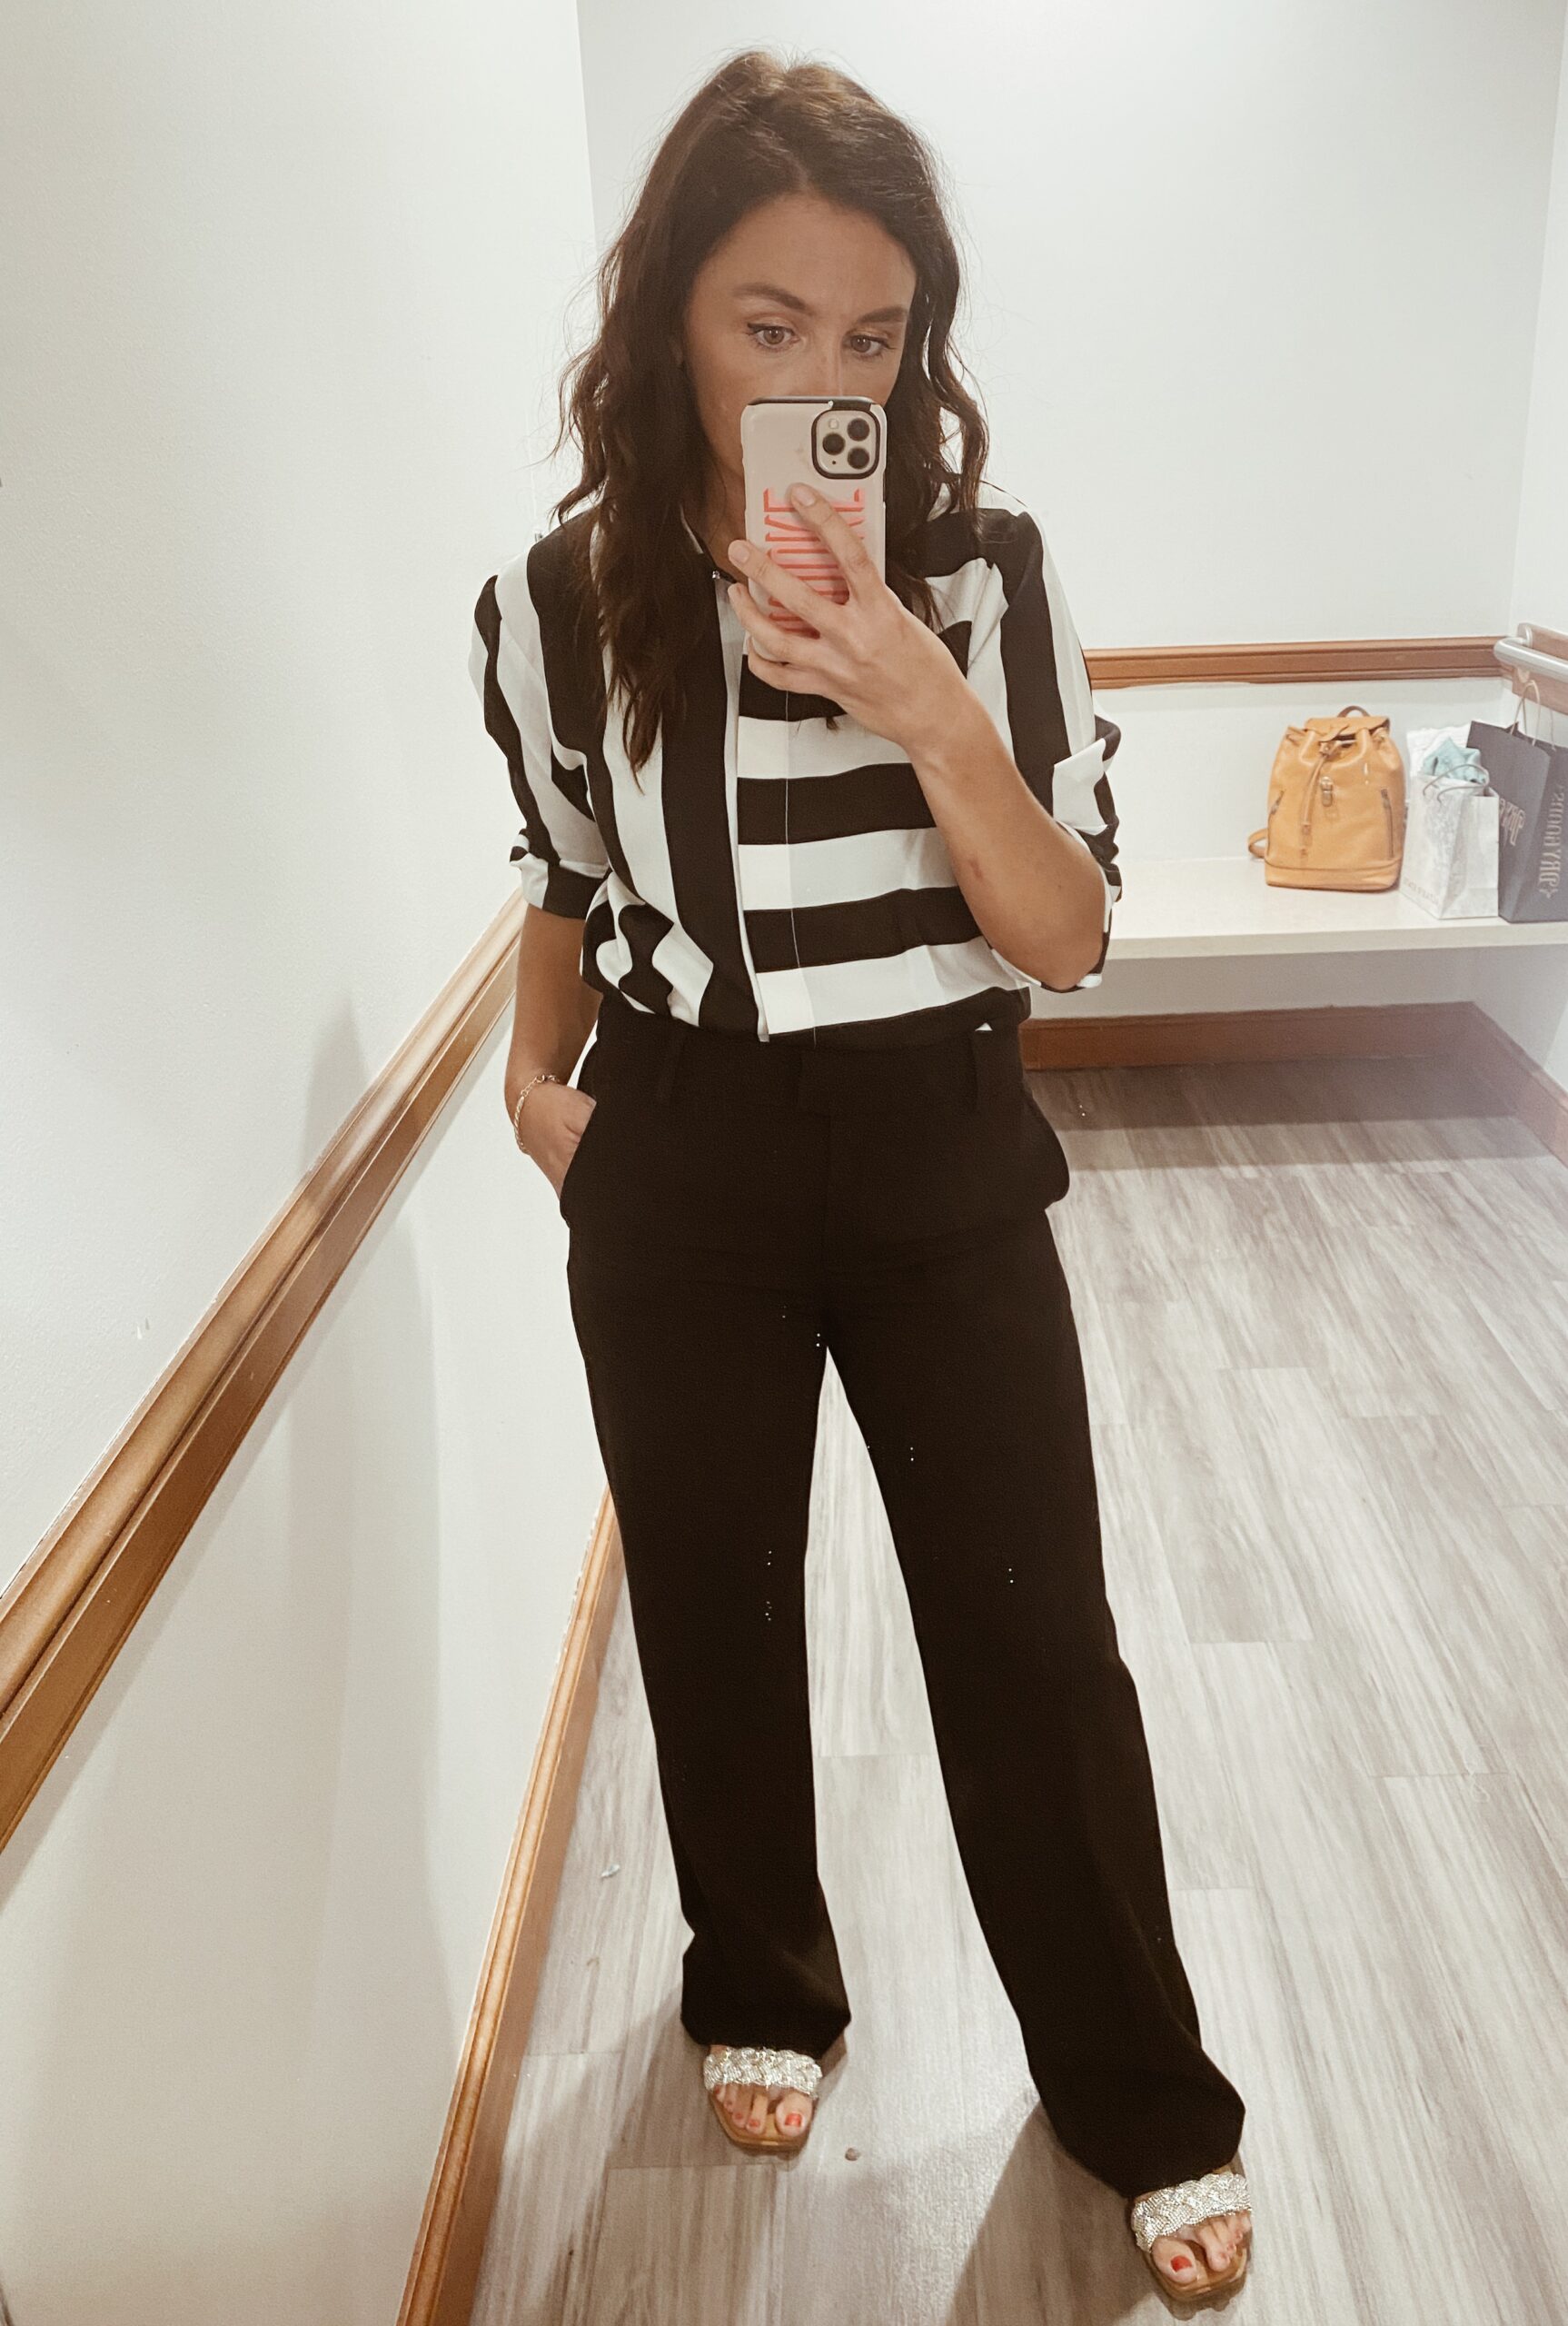 Woman in mirror wearing black and white striped shirt and black pants as an example of cute teacher outfits